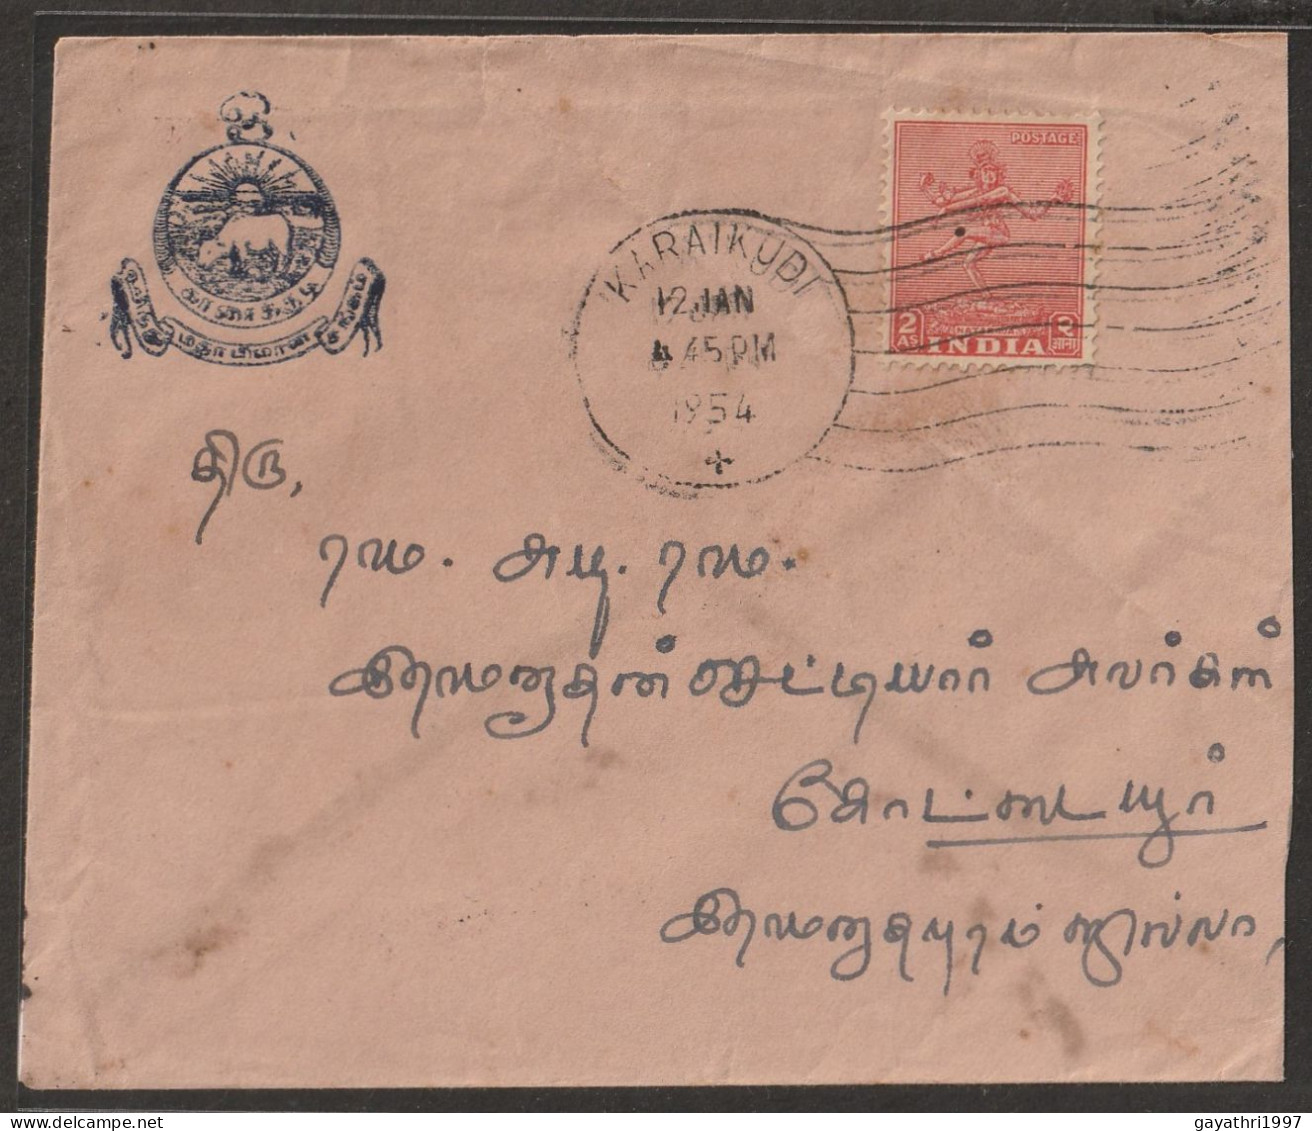 India 1954 Nataraja Stamp On Cover From Hindu Mathabane Sanga With Machine Cancellation To Party's(a184) - Hinduismus